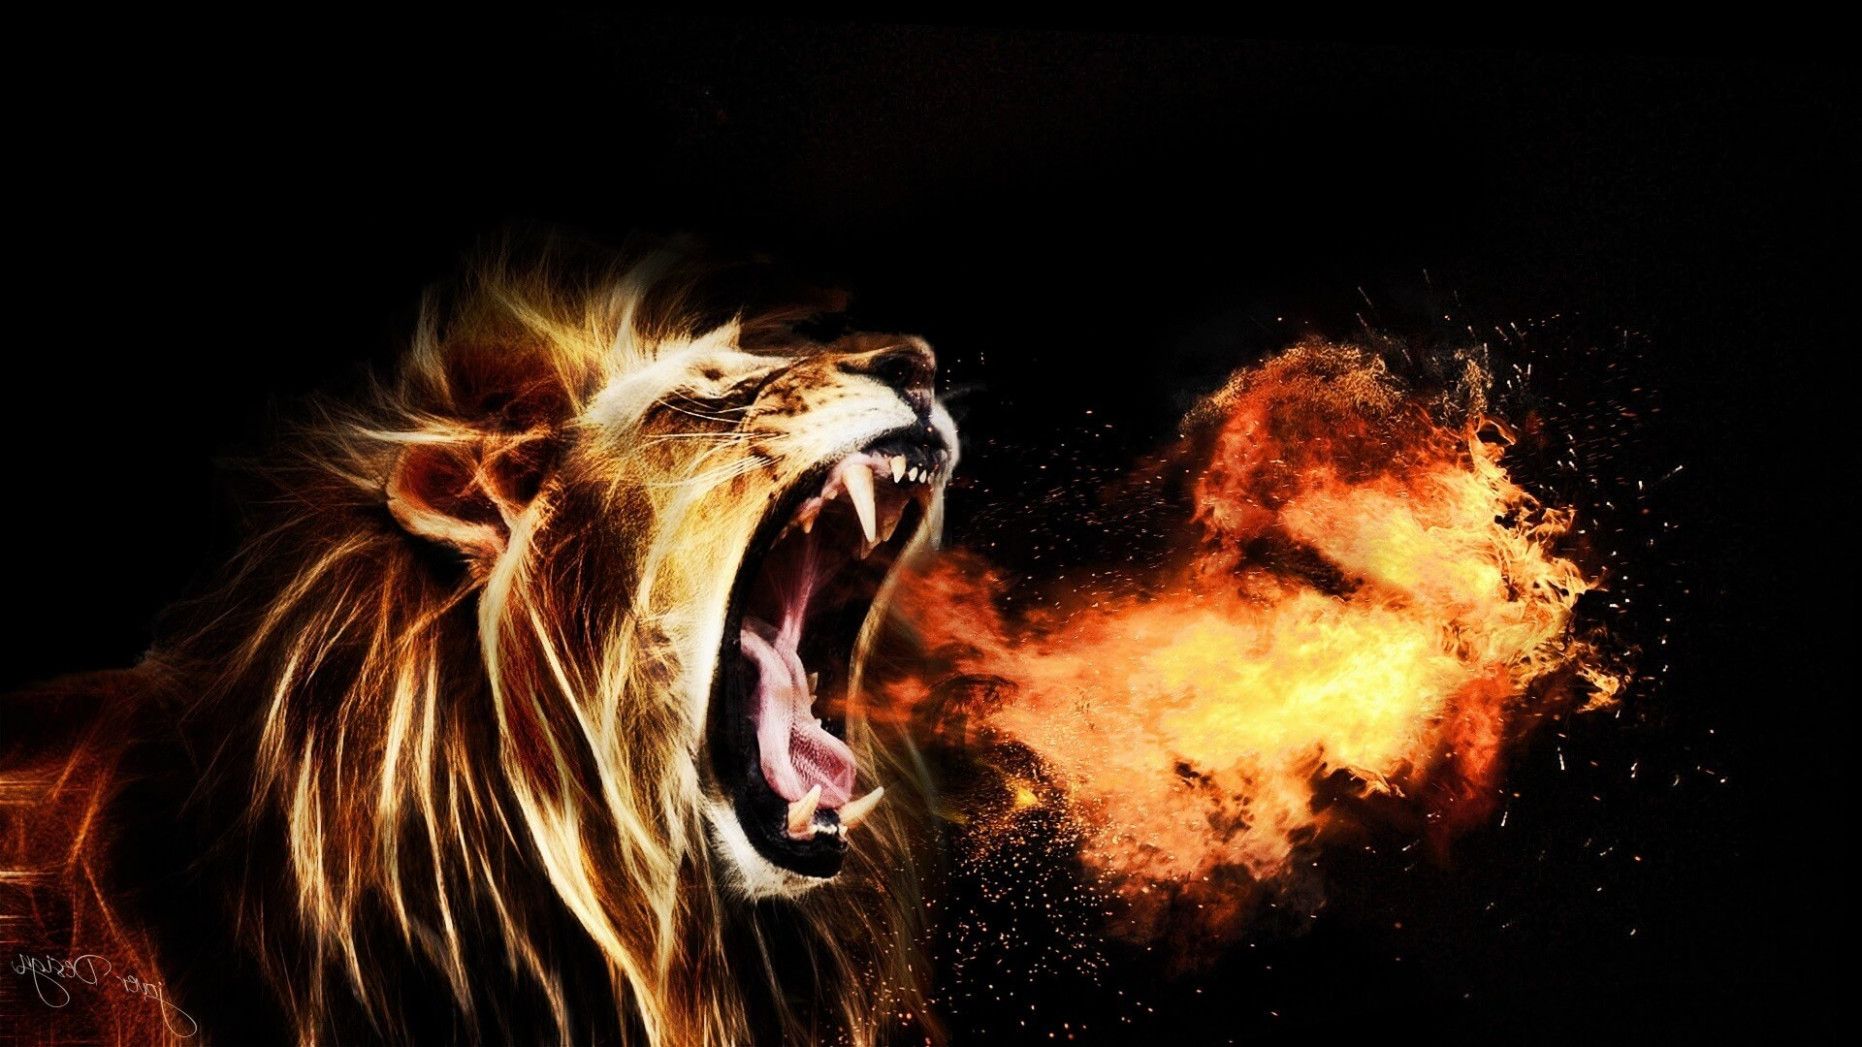 Cool Fire Lion Wallpapers